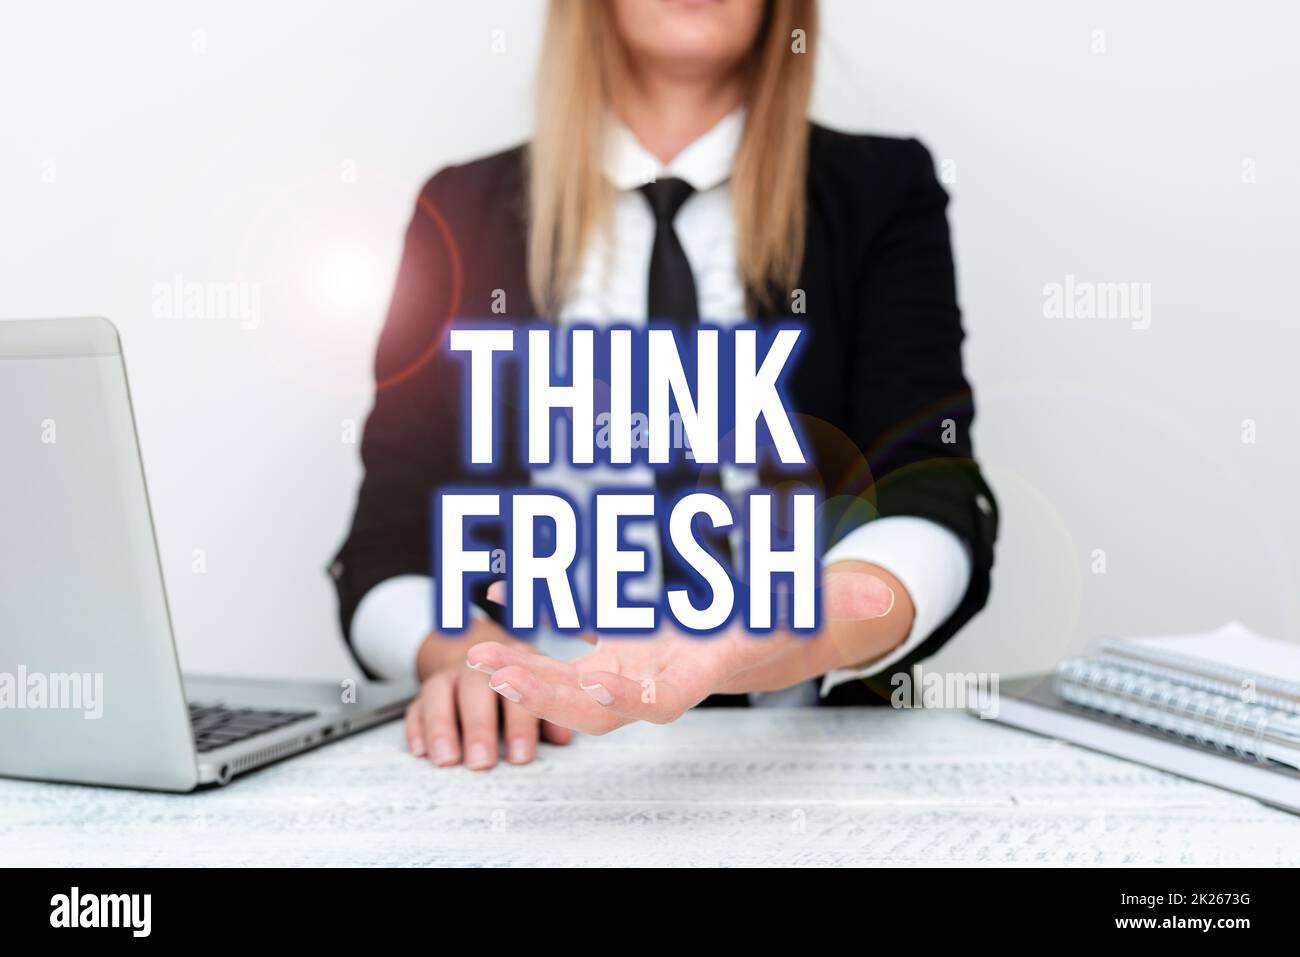 Text caption presenting Think Fresh. Concept meaning a new perspective of thinking when producing ideas and concepts Instructor Teaching Different Skills, Teacher Explaining New Methods Stock Photo